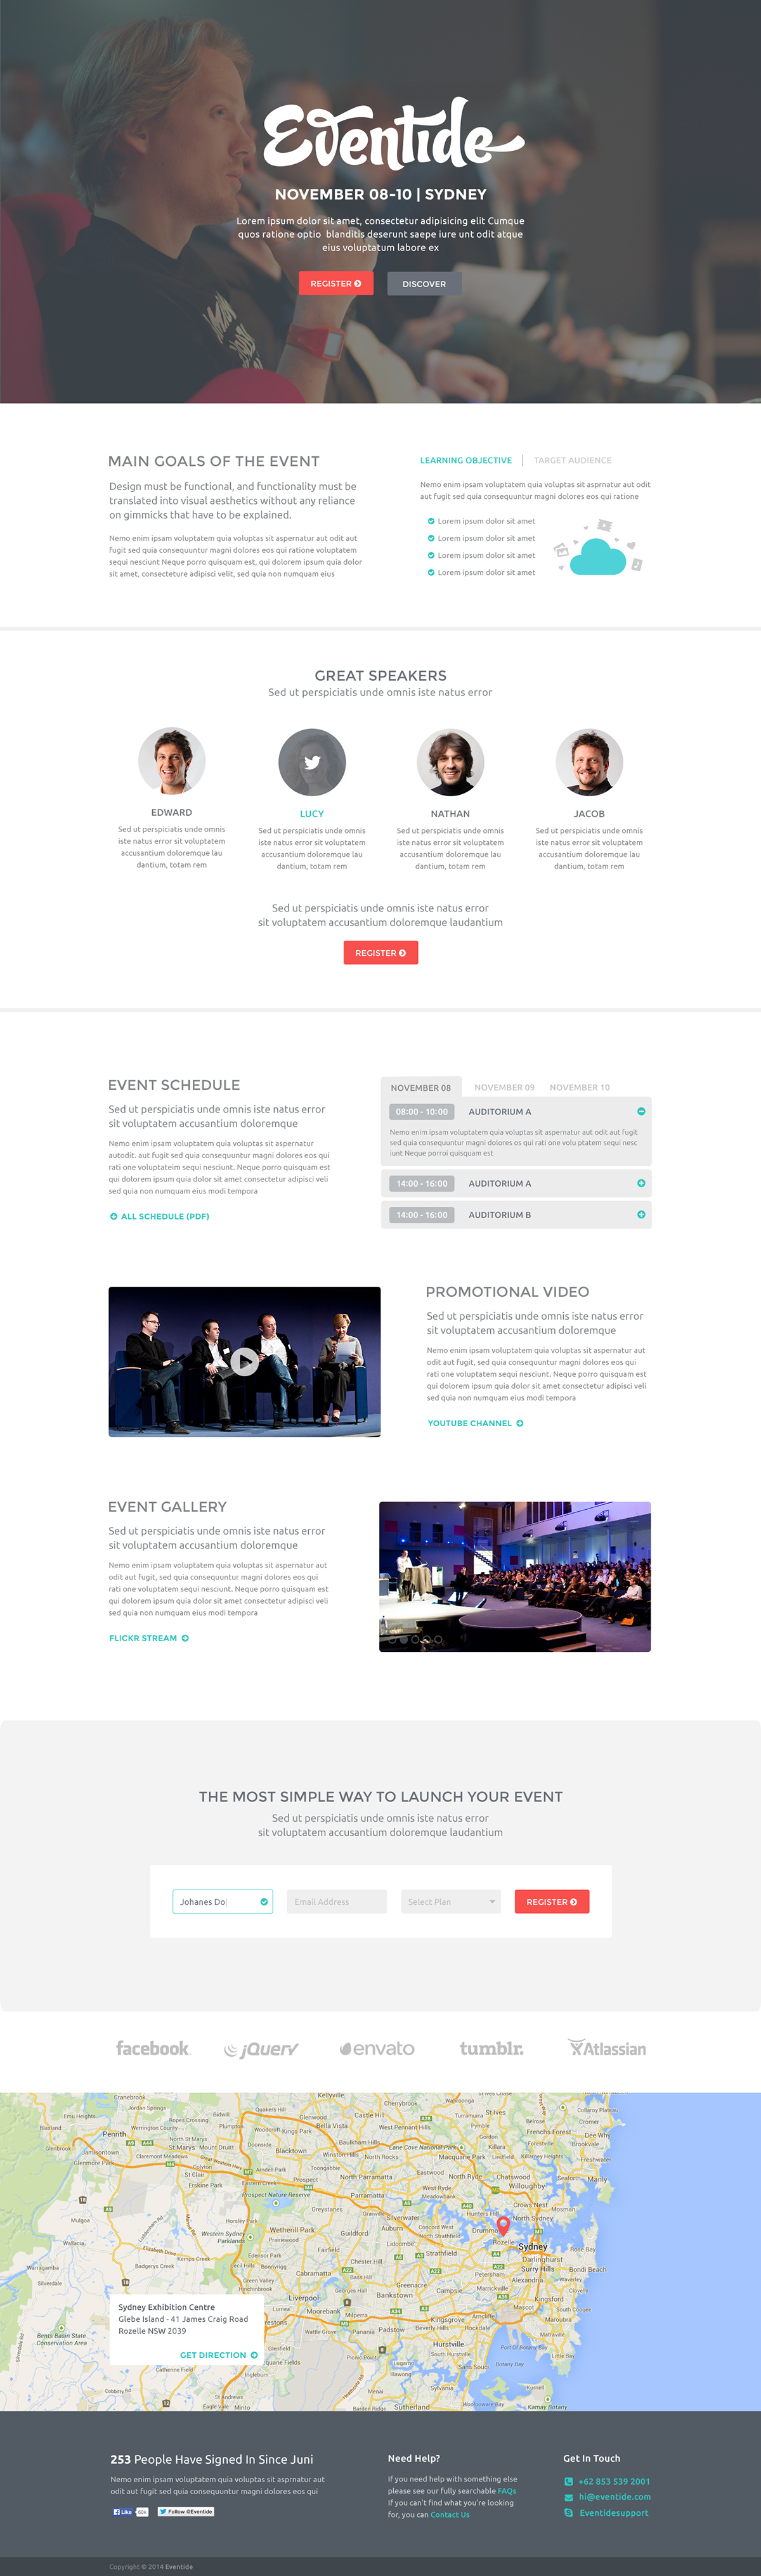 Eventide Free Event Landing Page Event Landing Page Free Web Template Landing Page